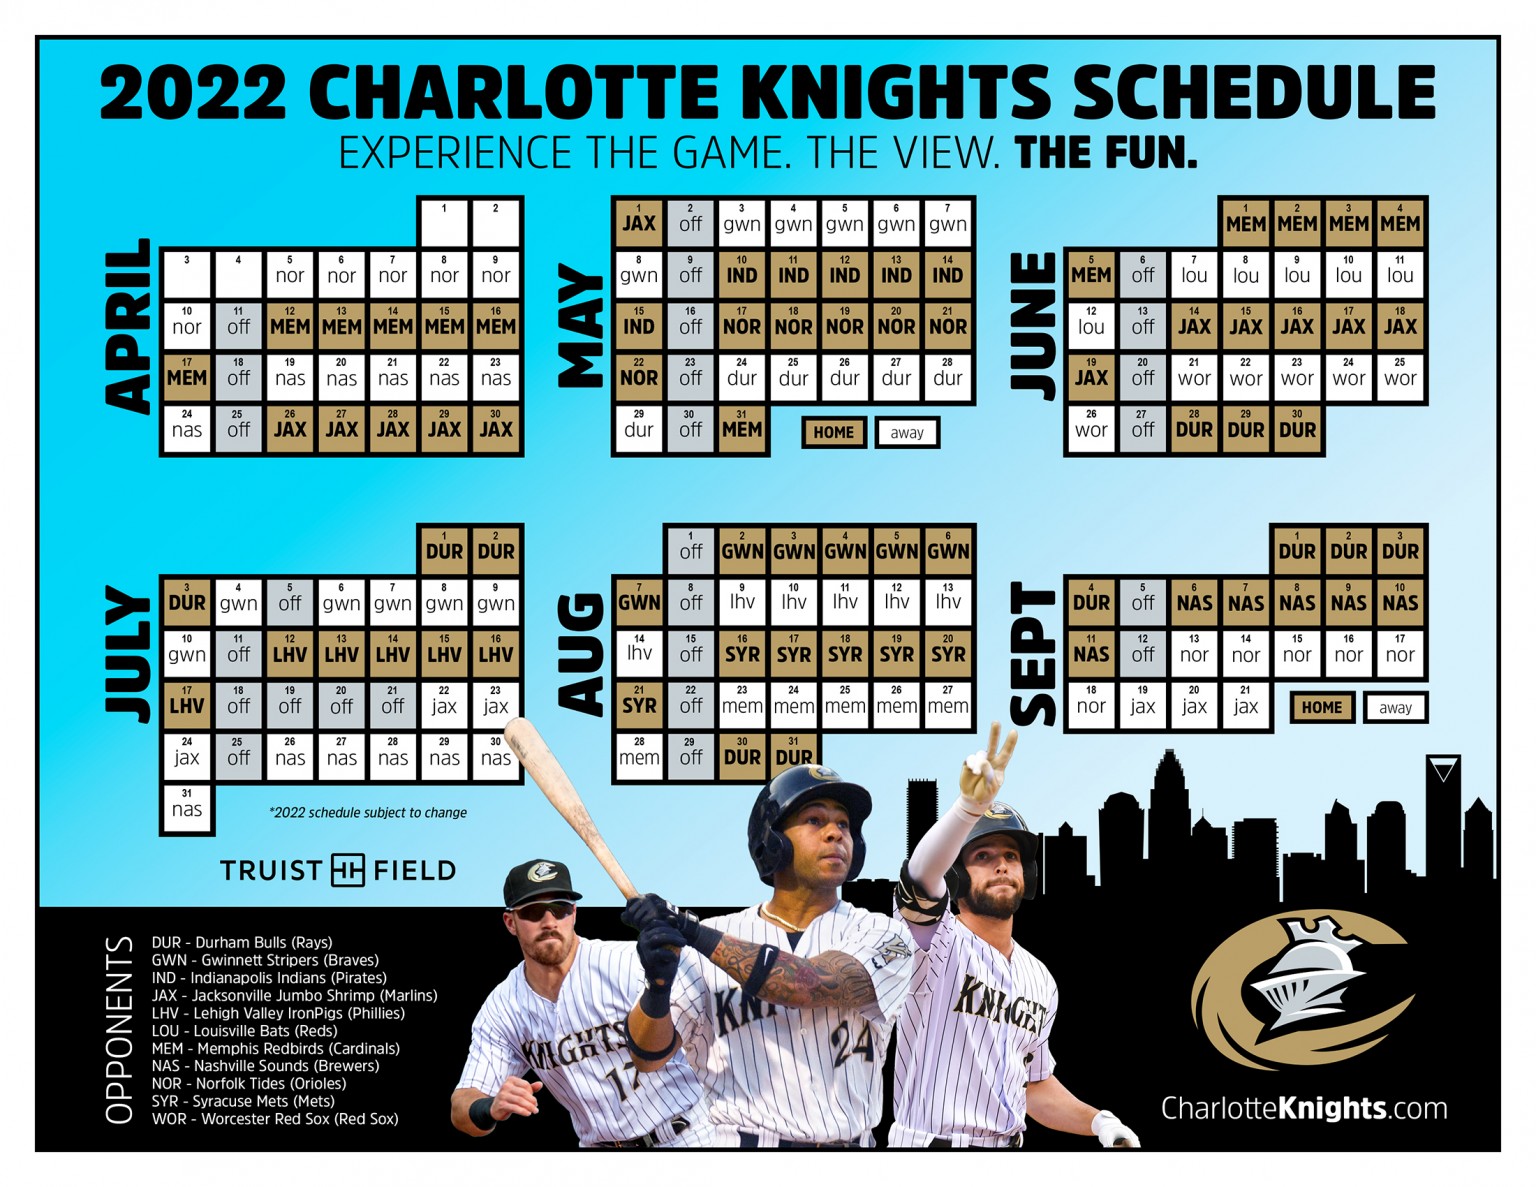 Charlotte Knights Unveil 2022 Schedule - WCCB Charlotte's CW